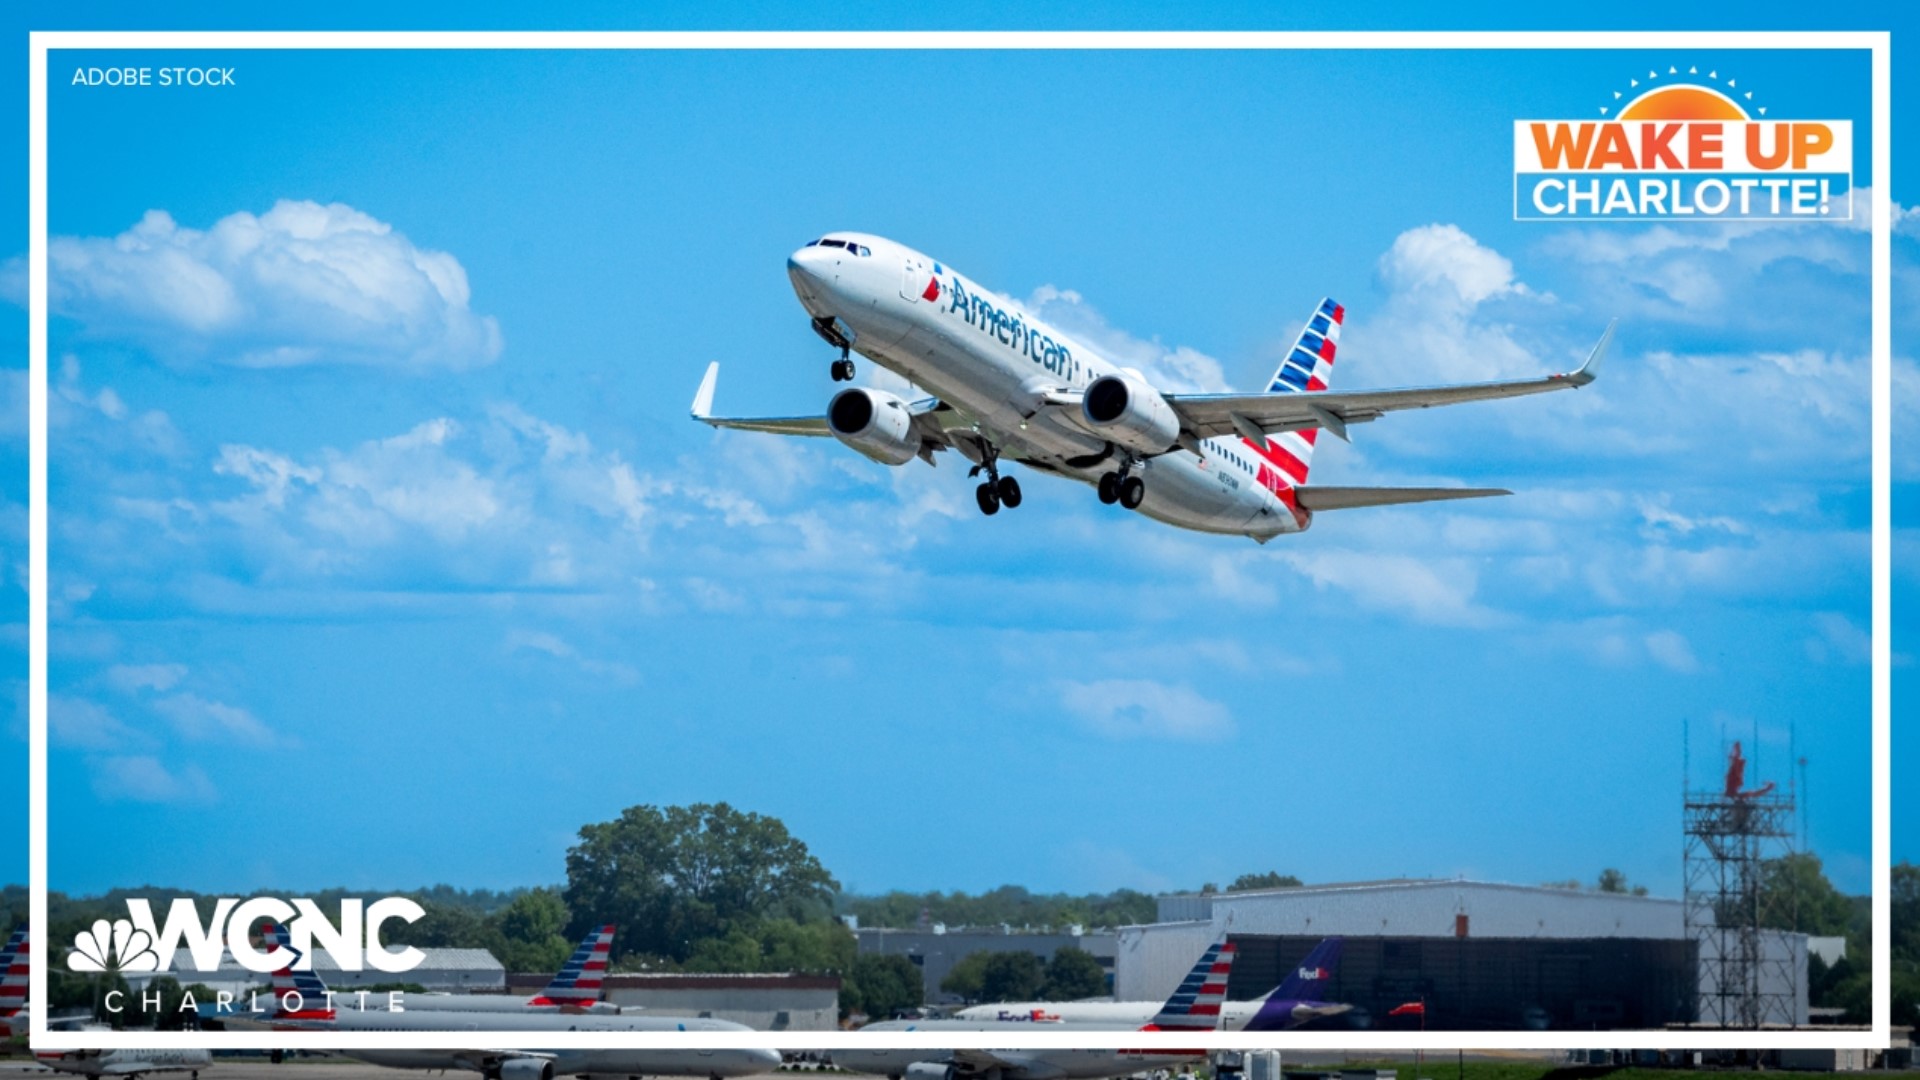 American Airlines - Airline tickets and low fares at